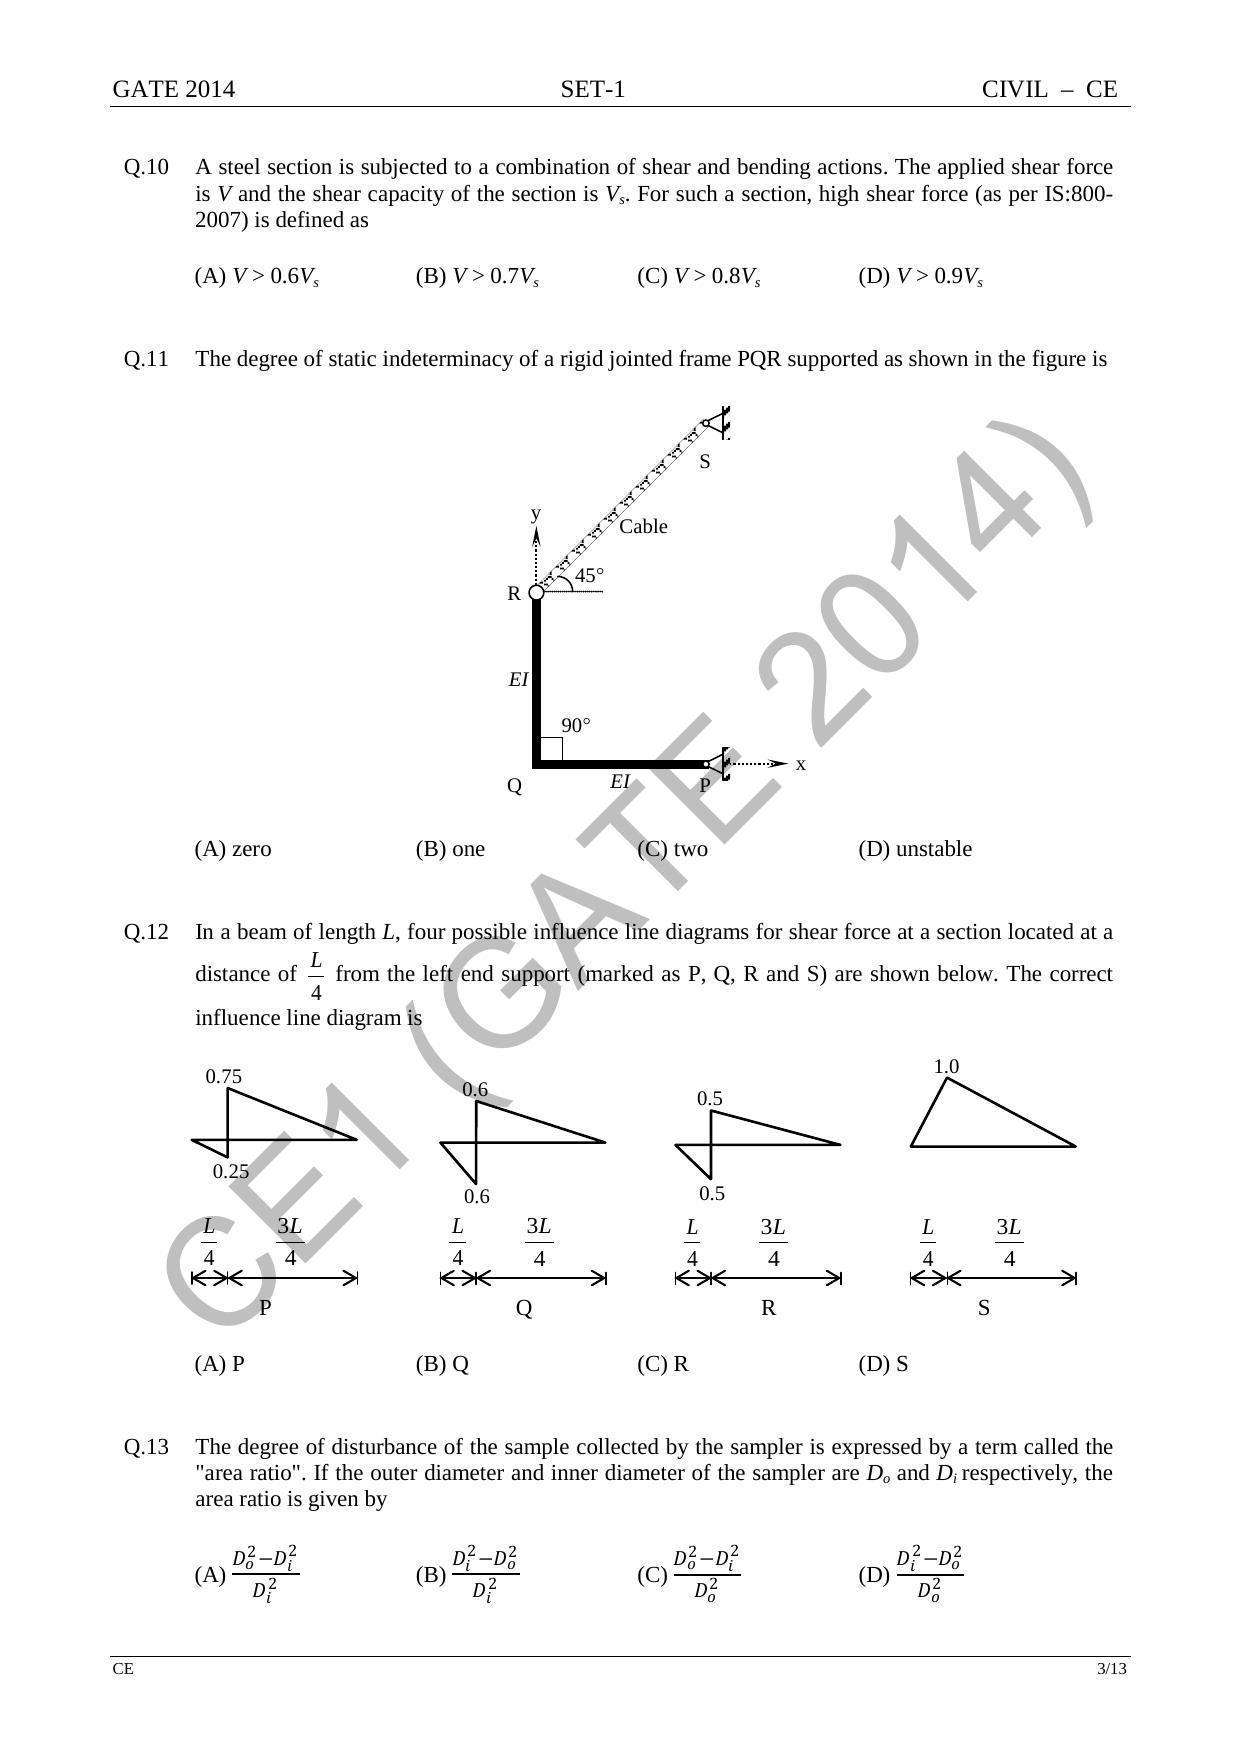 GATE 2014 Civil Engineering (CE) Question Paper with Answer Key - Page 10